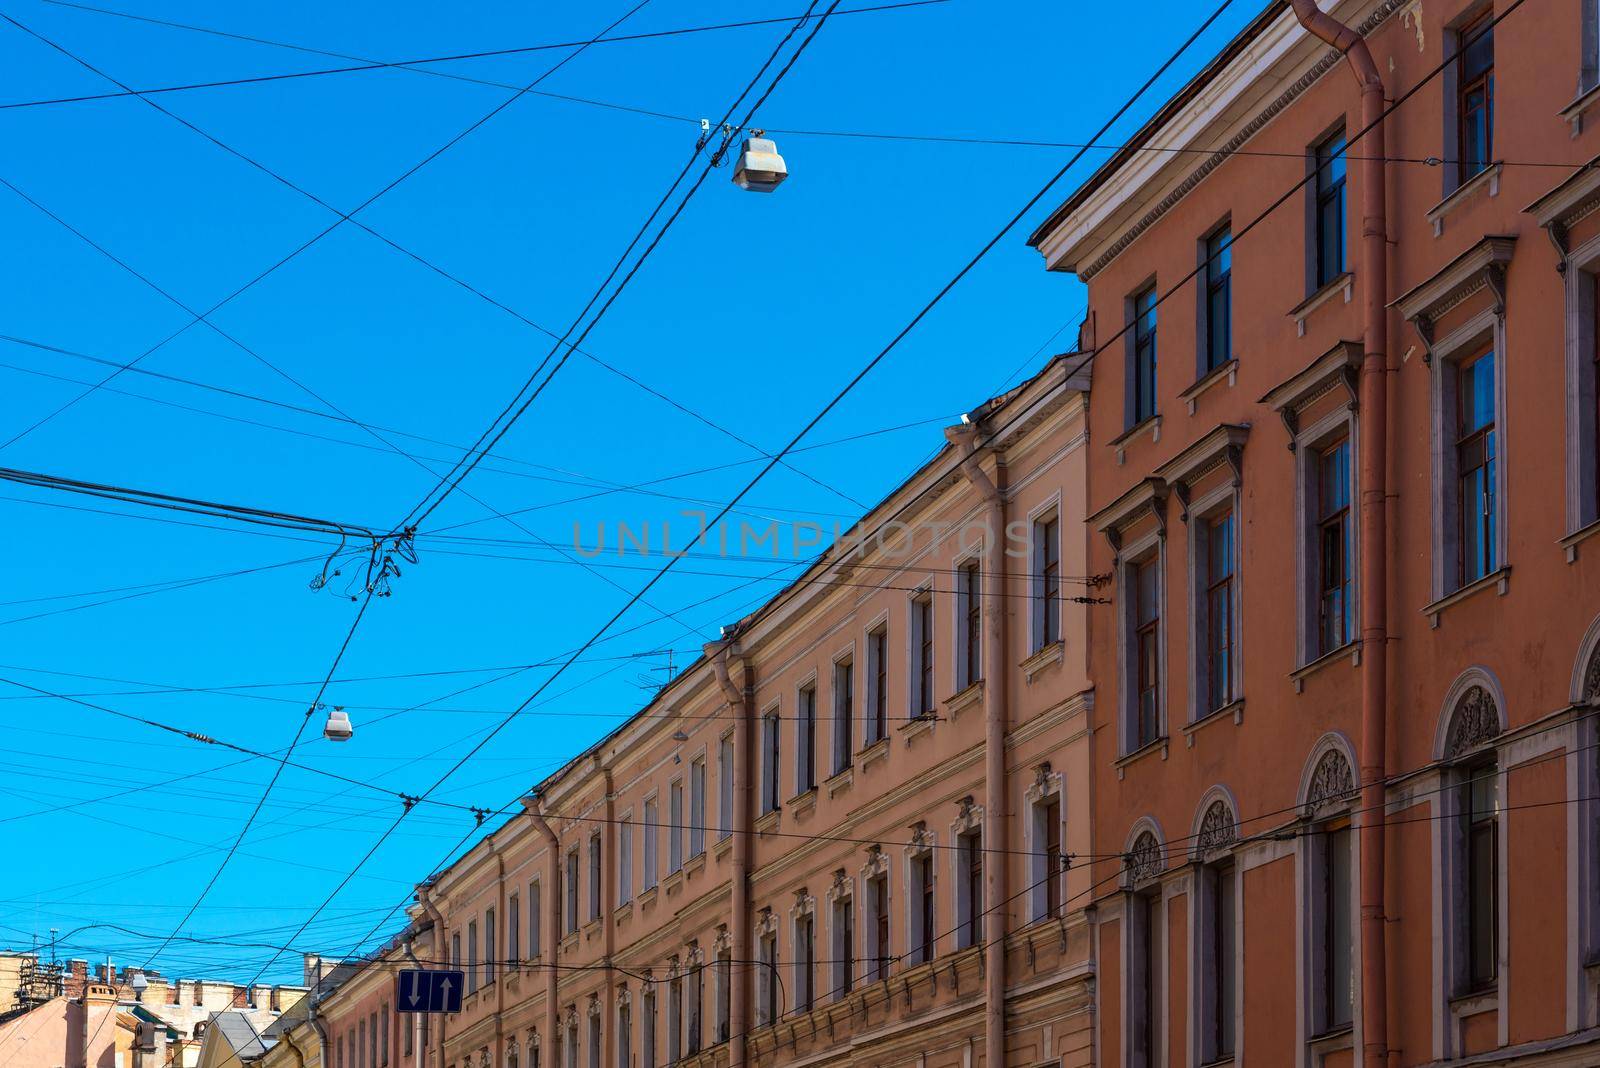 Electrical wires and cables over urban downtown for multi purpose in Saint Petersburg,Russia by Nuamfolio